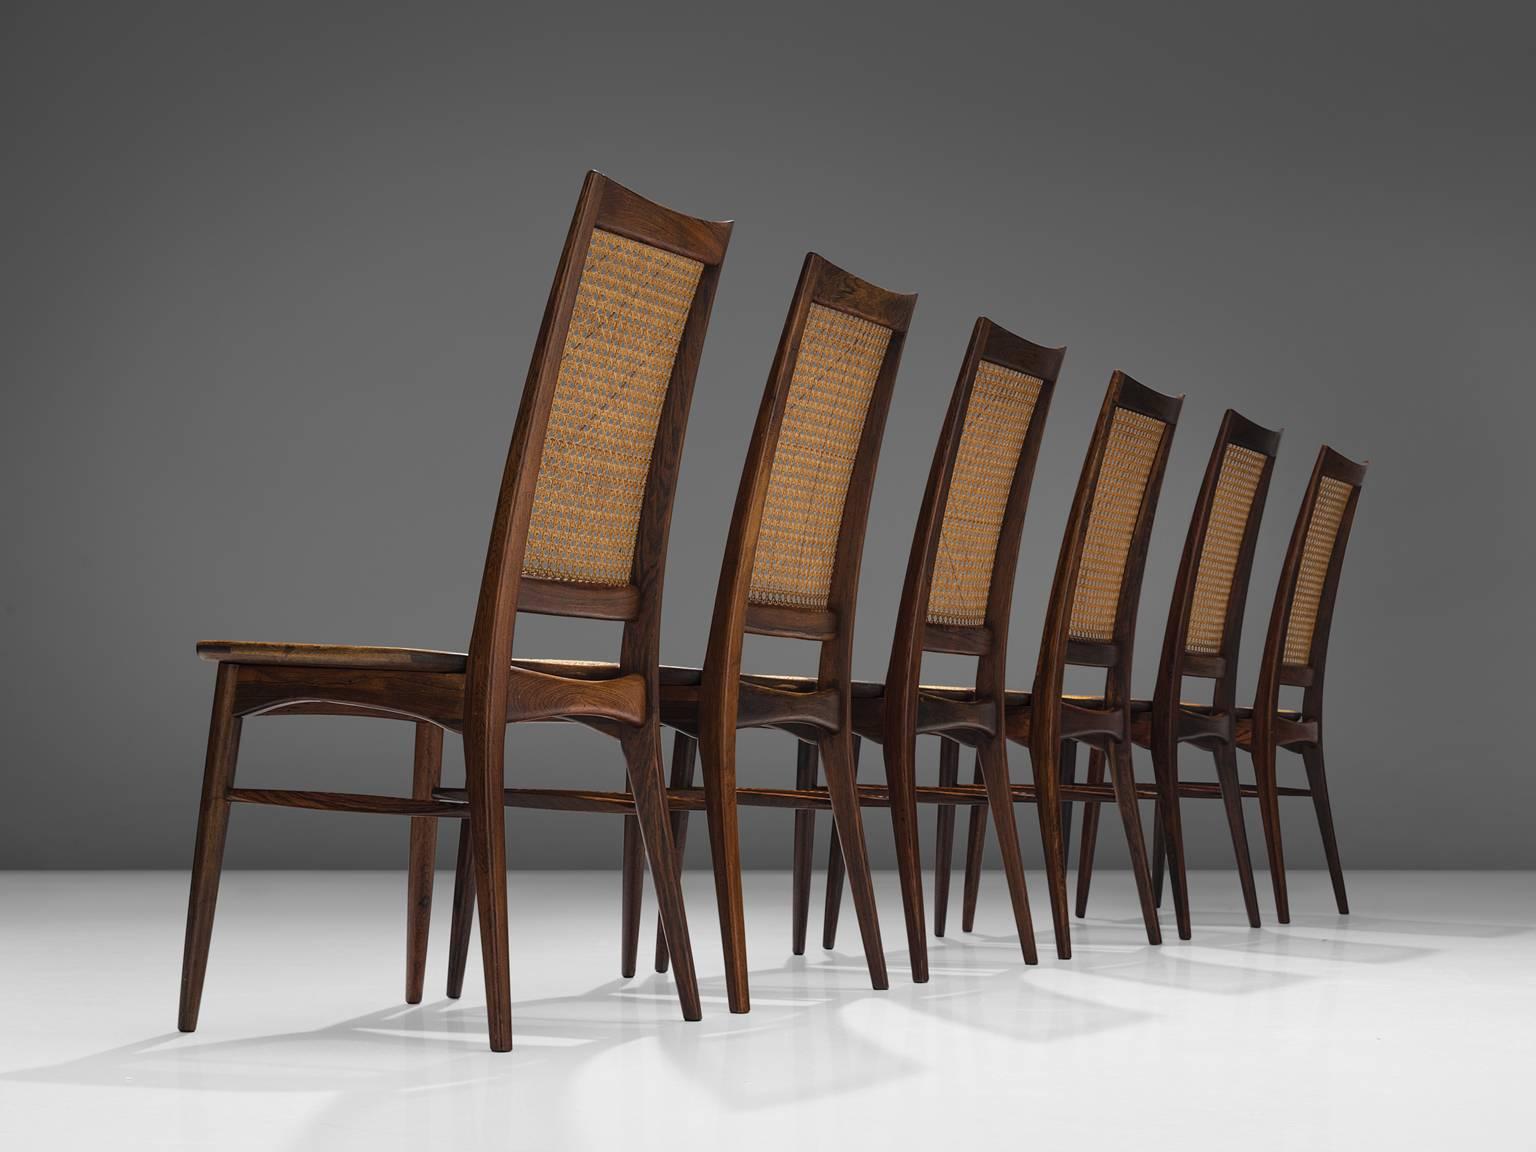 Niels Kofoed, set of six dining chairs, rosewood and wicker, Denmark, 1960s. 

Set of six refined high back dining chairs in rosewood and cane. These high back chairs have an elegant and recognizable Scandinavian design. The elegant high back is